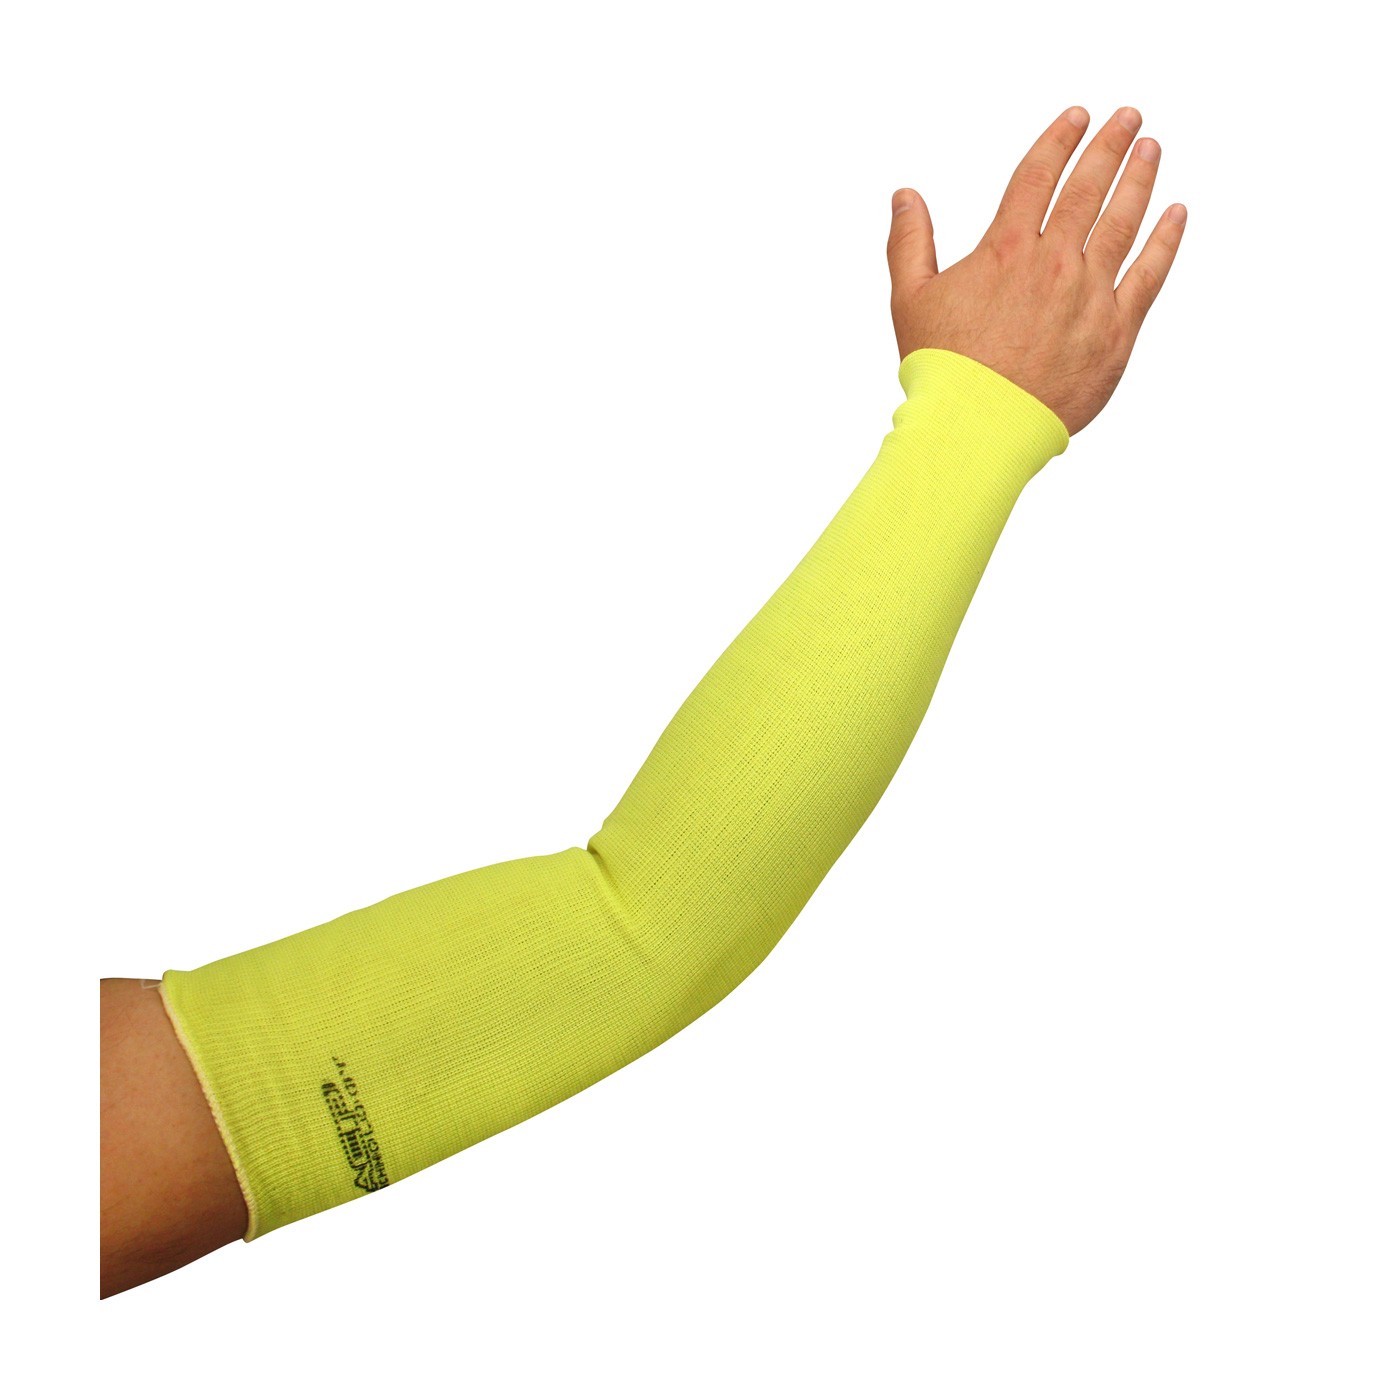 Kevlar ACP 2 Ply Slv, Cotton lined, Neon Yellow, 3x24 inch